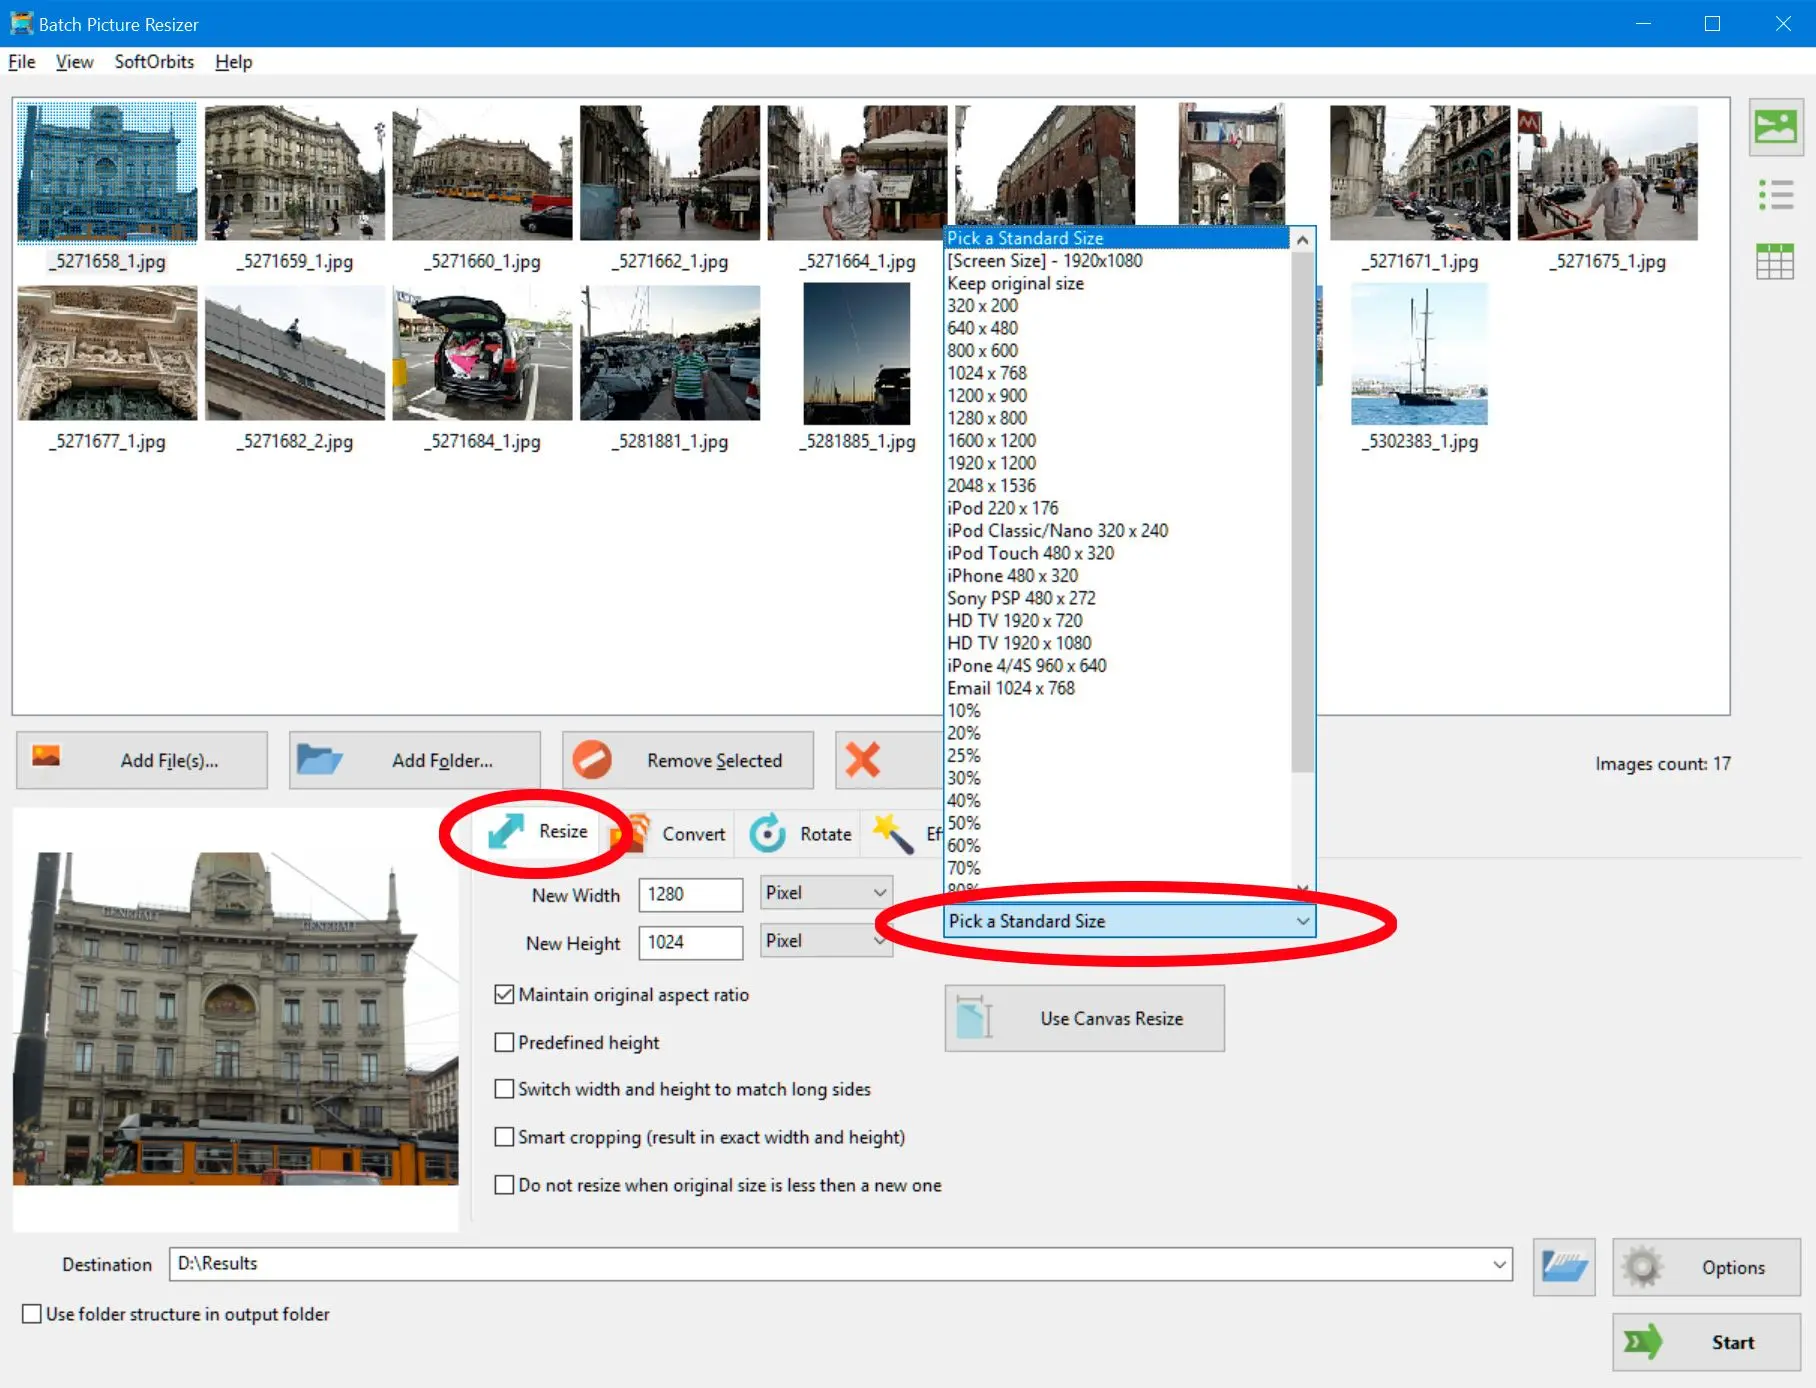 Improve Your Images by Batch Picture Resizer..